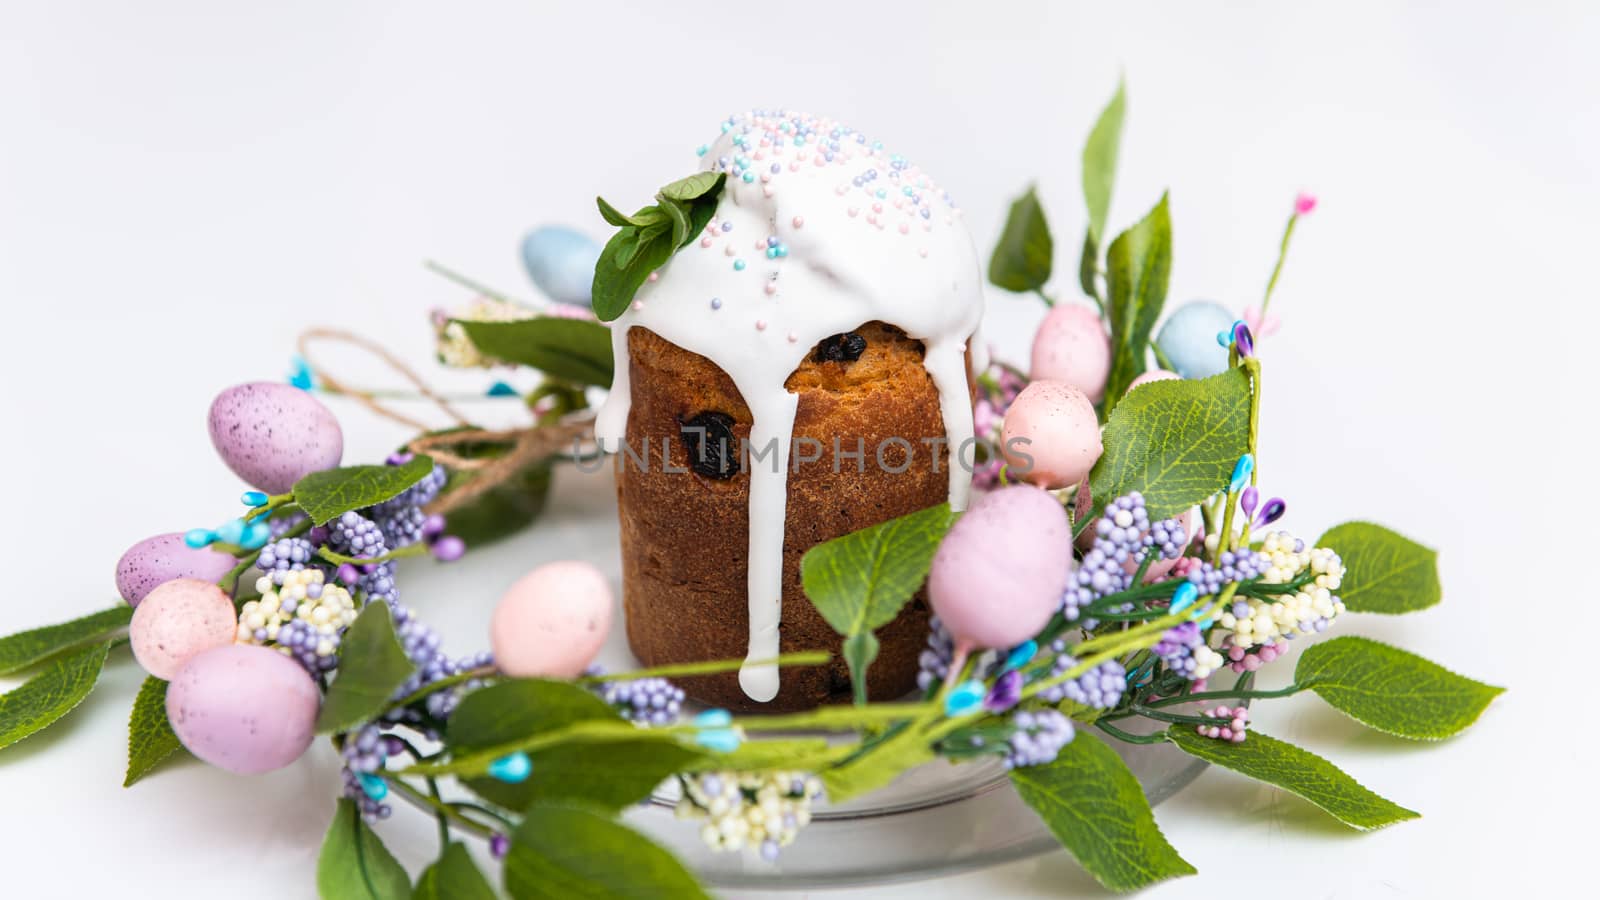 Easter cake in the center of a wreath of spring flowers on a white background with copy space by marynkin